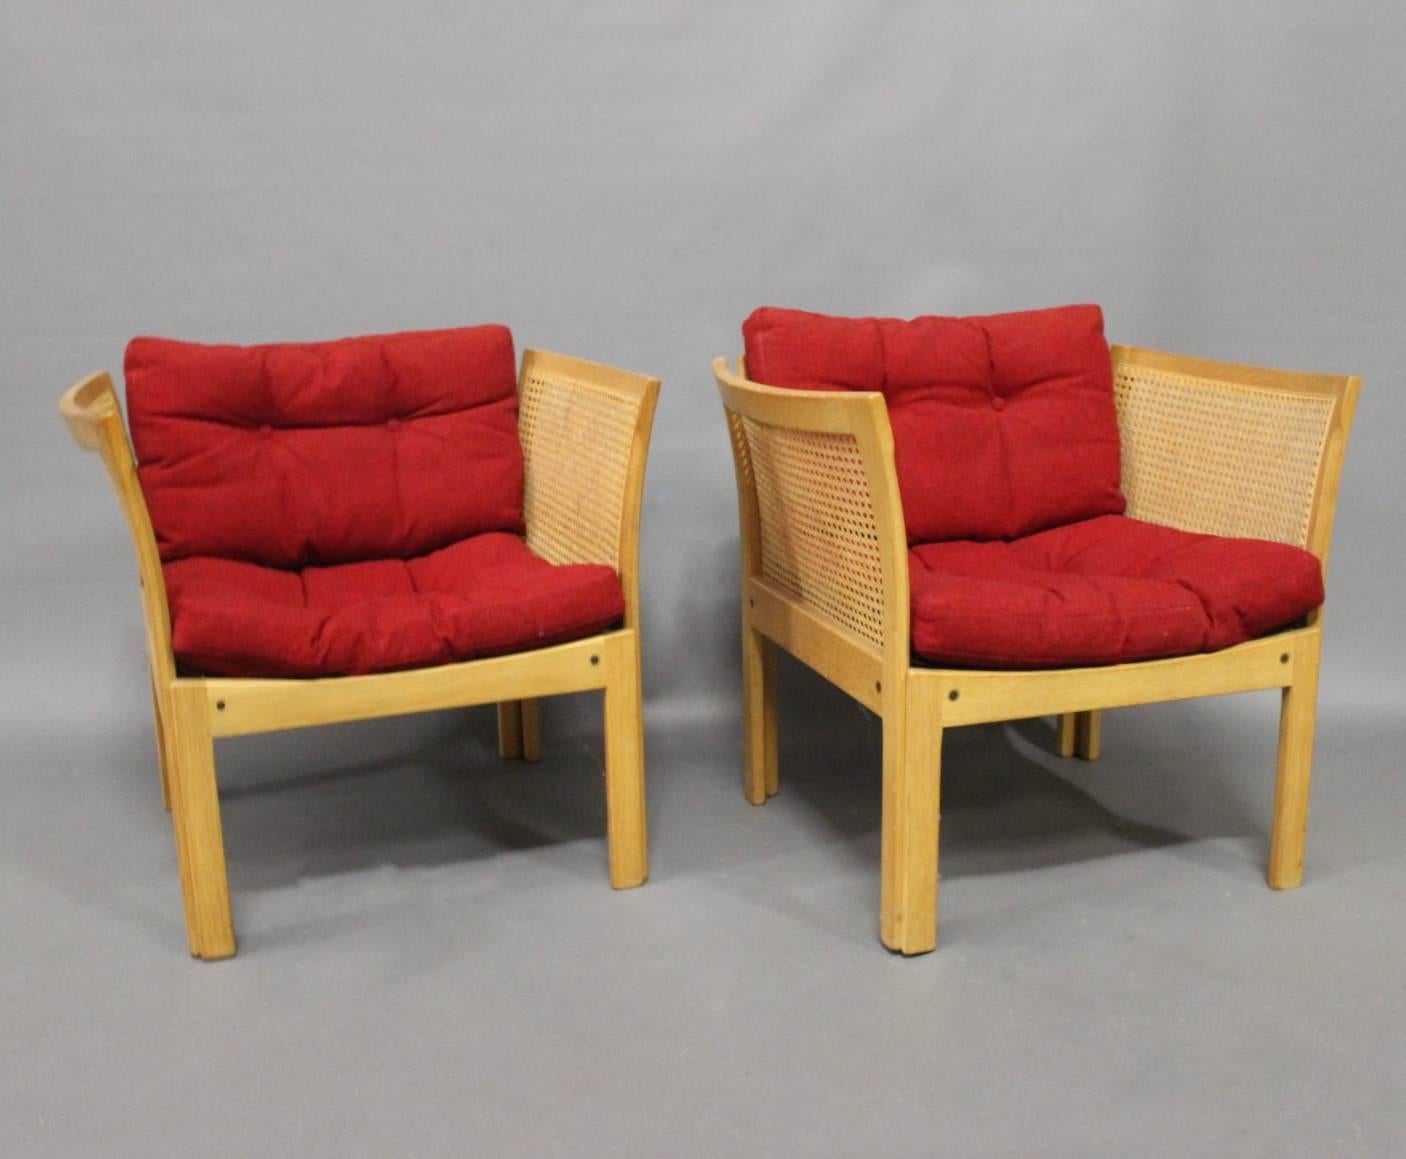 A pair of easy chairs in oak designed by Rud Thygesen and Johnny Sørensen, manufactured by CFC Silkeborg in the 1960s.